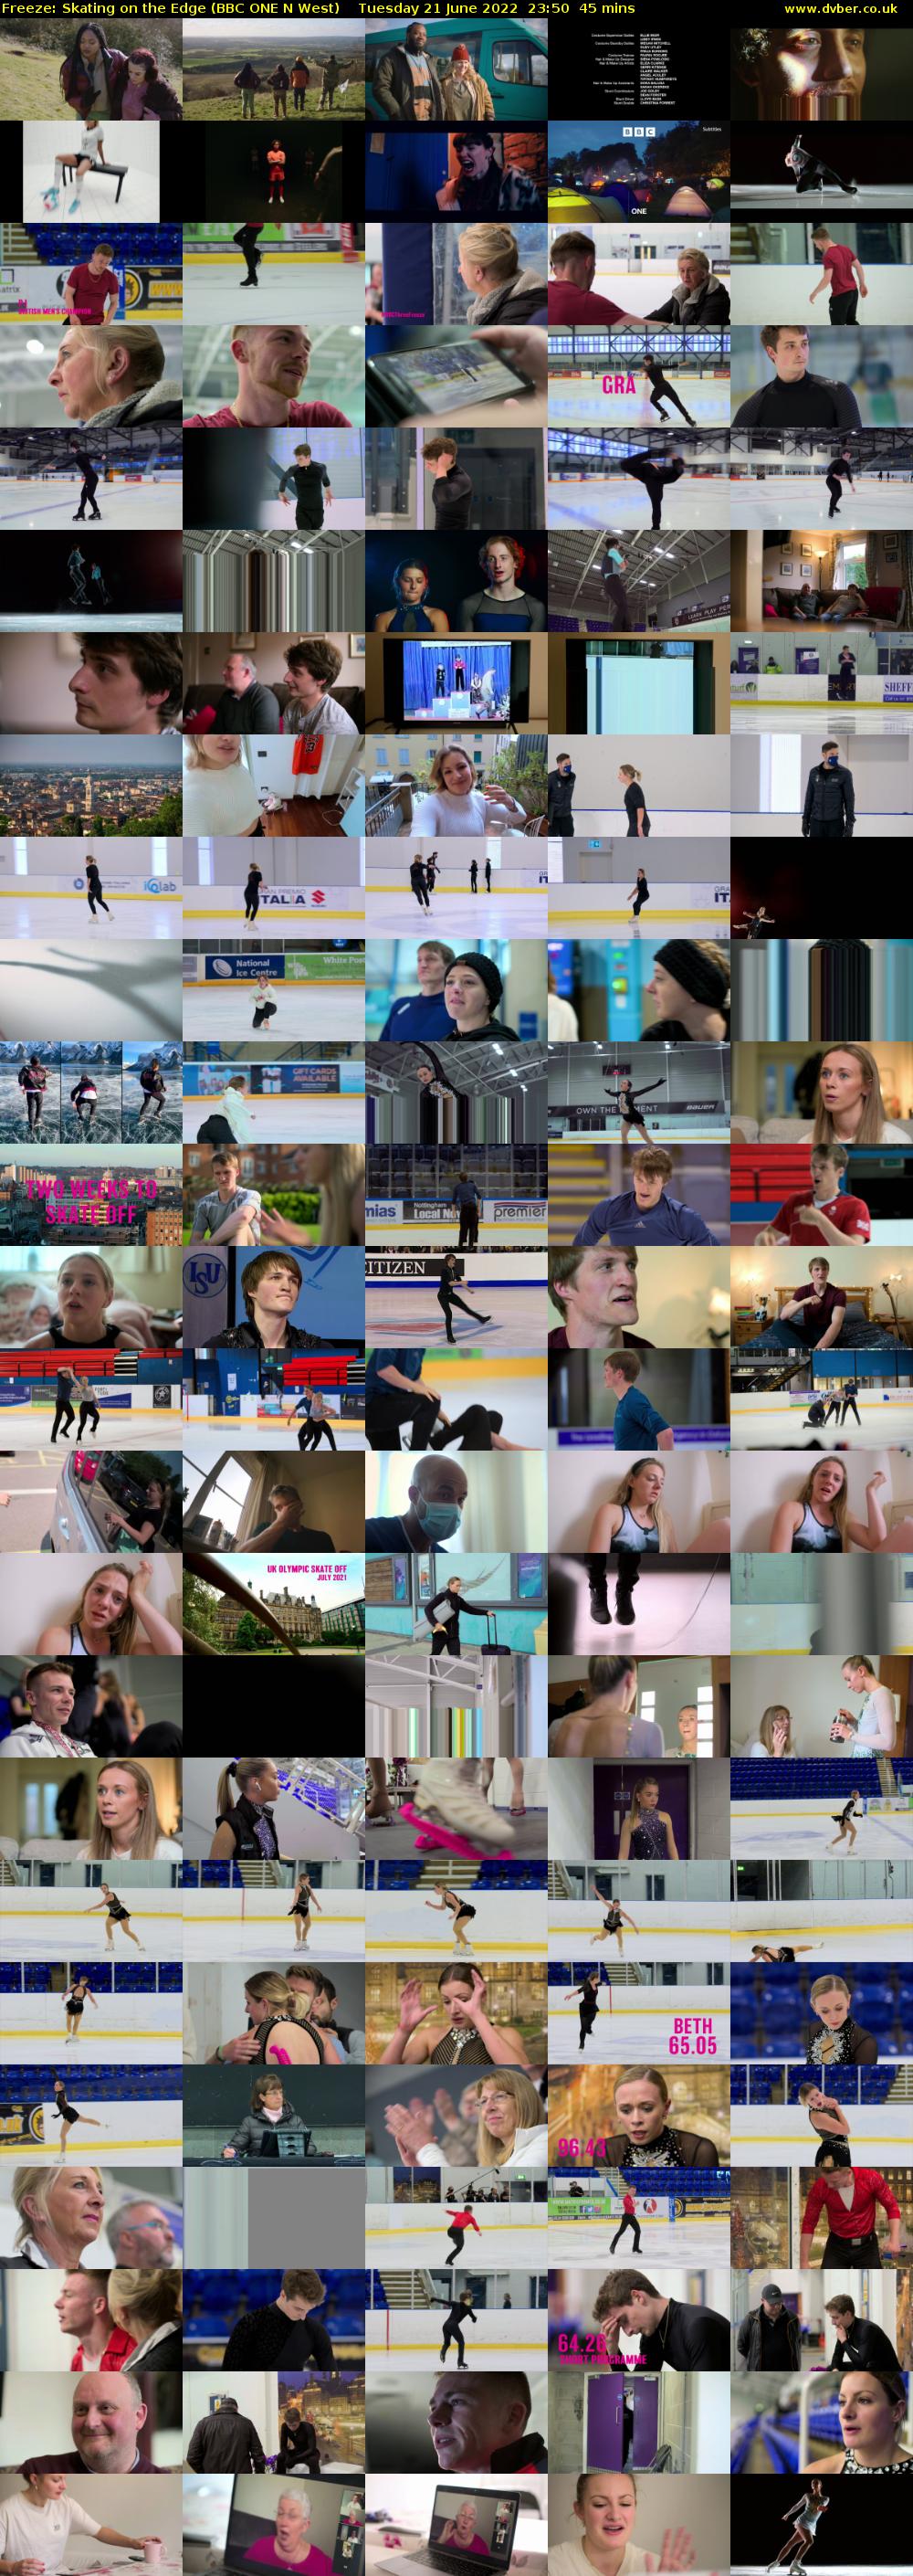 Freeze: Skating on the Edge (BBC ONE N West) Tuesday 21 June 2022 23:50 - 00:35